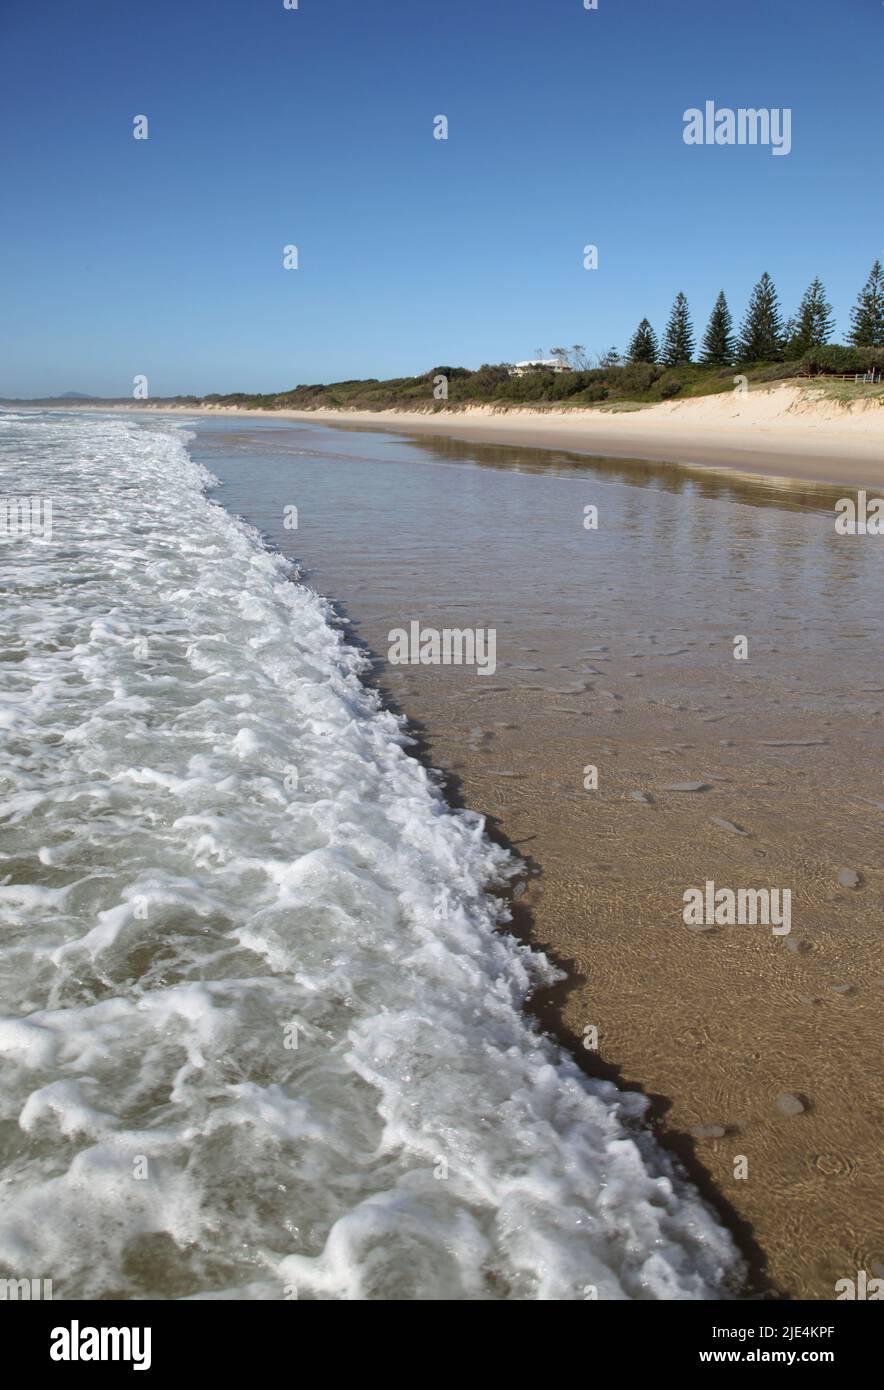 Pippies Beach - Yamba Australia. A wave rolls in across the beach at the popular tourist destination on NSW's north coast. Stock Photo